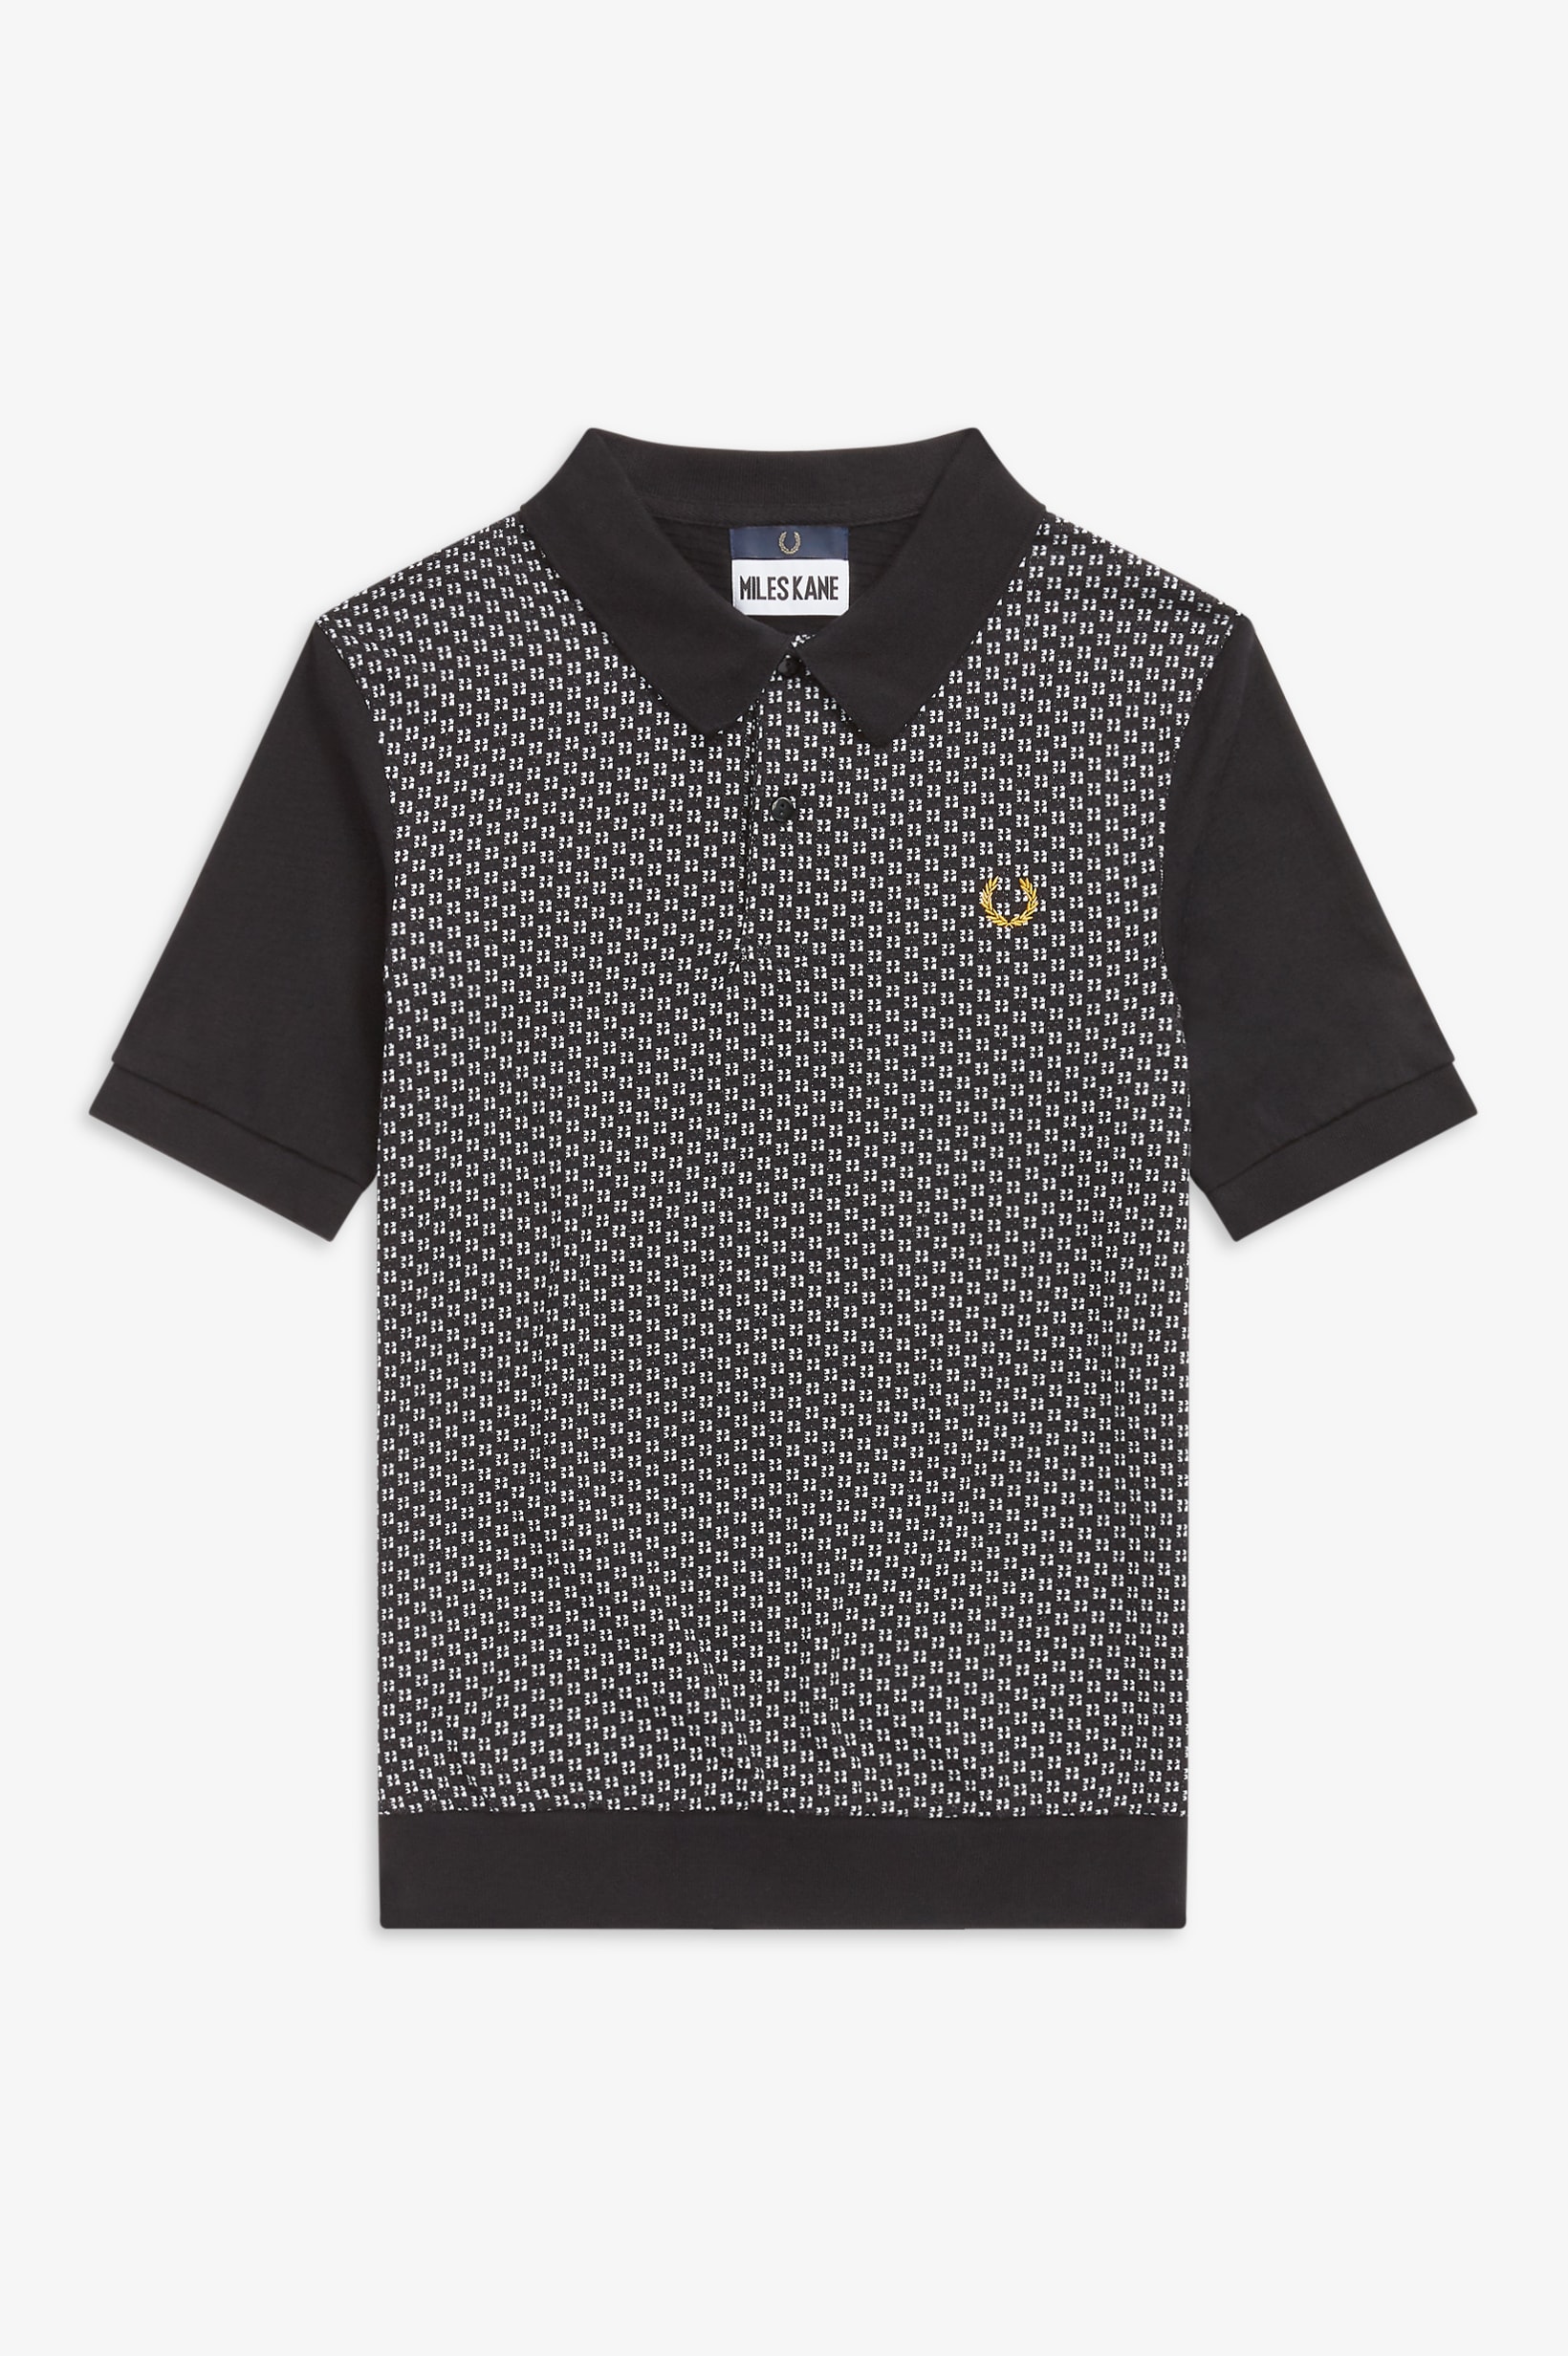 fred-perry-miles-kane-19-9